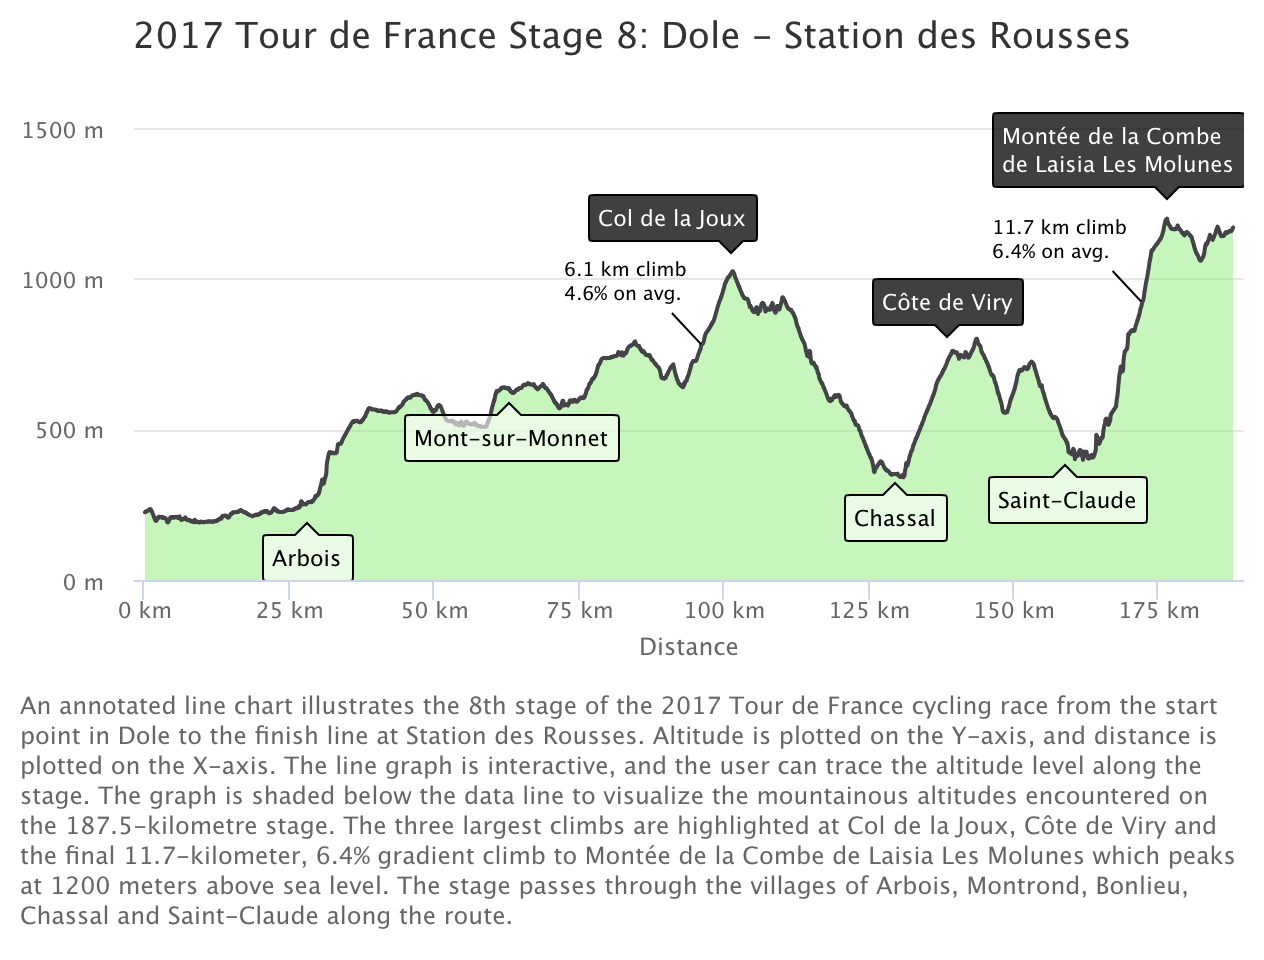 An annotated line chart illustrates the 8th stage of the 2017 Tour de France cycling race from the start point in Dole to the finish line at Station des Rousses. Altitude is plotted on the Y-axis, and distance is plotted on the X-axis.